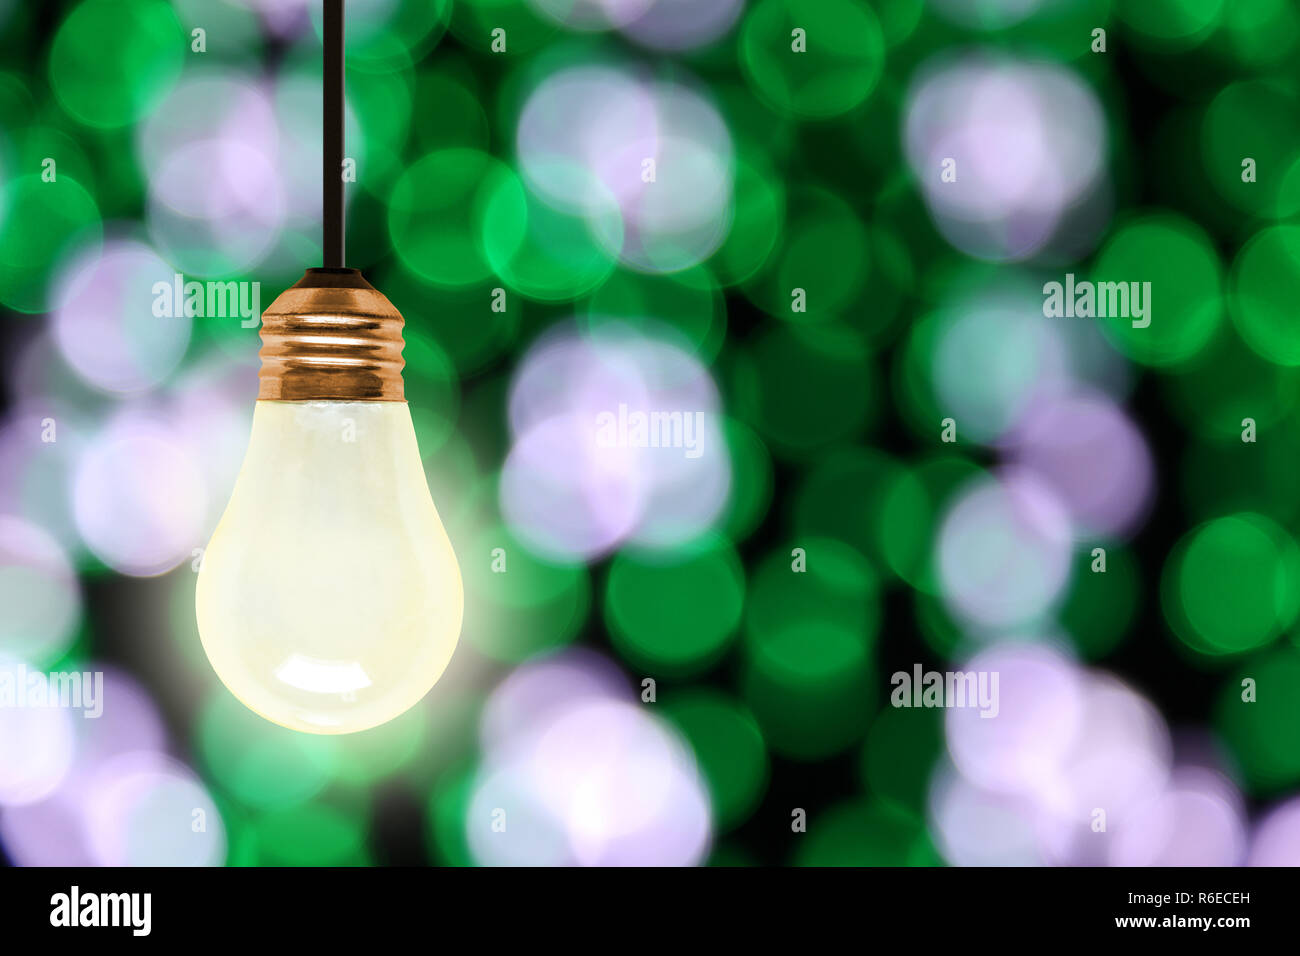 Illuminating light bulb hanging with colorful blurred Christmas lights bokeh effect and copy space. Stock Photo